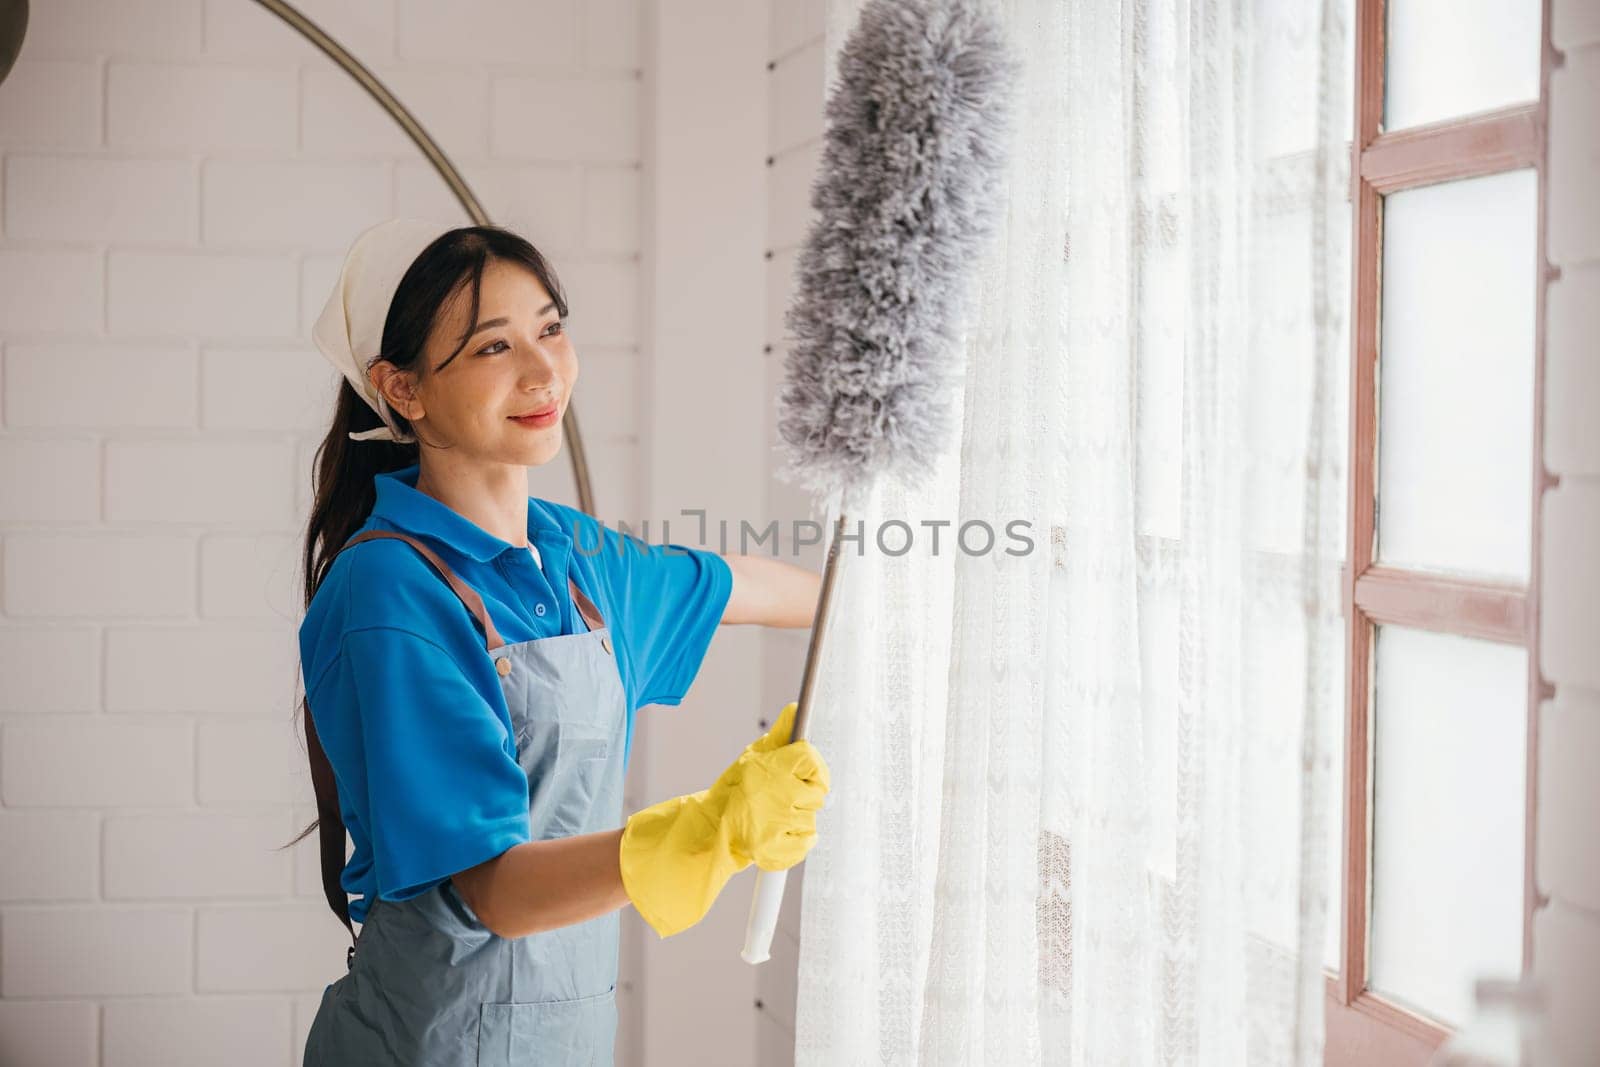 Enjoyment in routine cleaning for this smiling Asian woman. She stands dusting window blinds with duster. Ensuring hygiene and purity at home. Modern cleaning service portraying happy occupation. by Sorapop